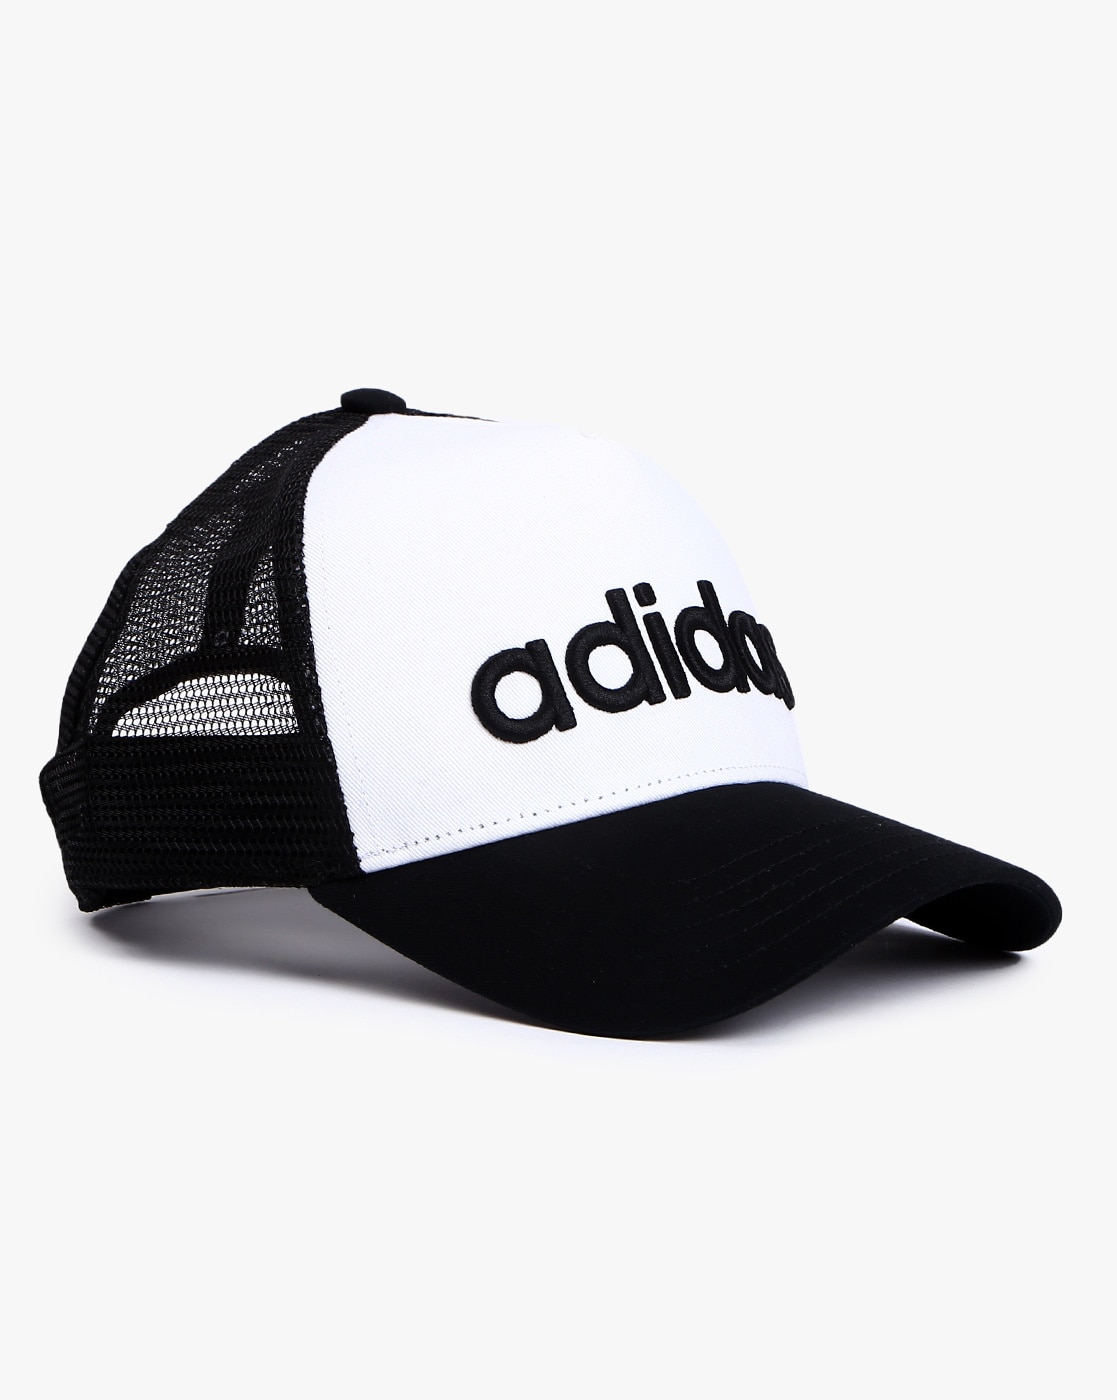 Buy Black & White Caps & Hats for Men by ADIDAS Online |